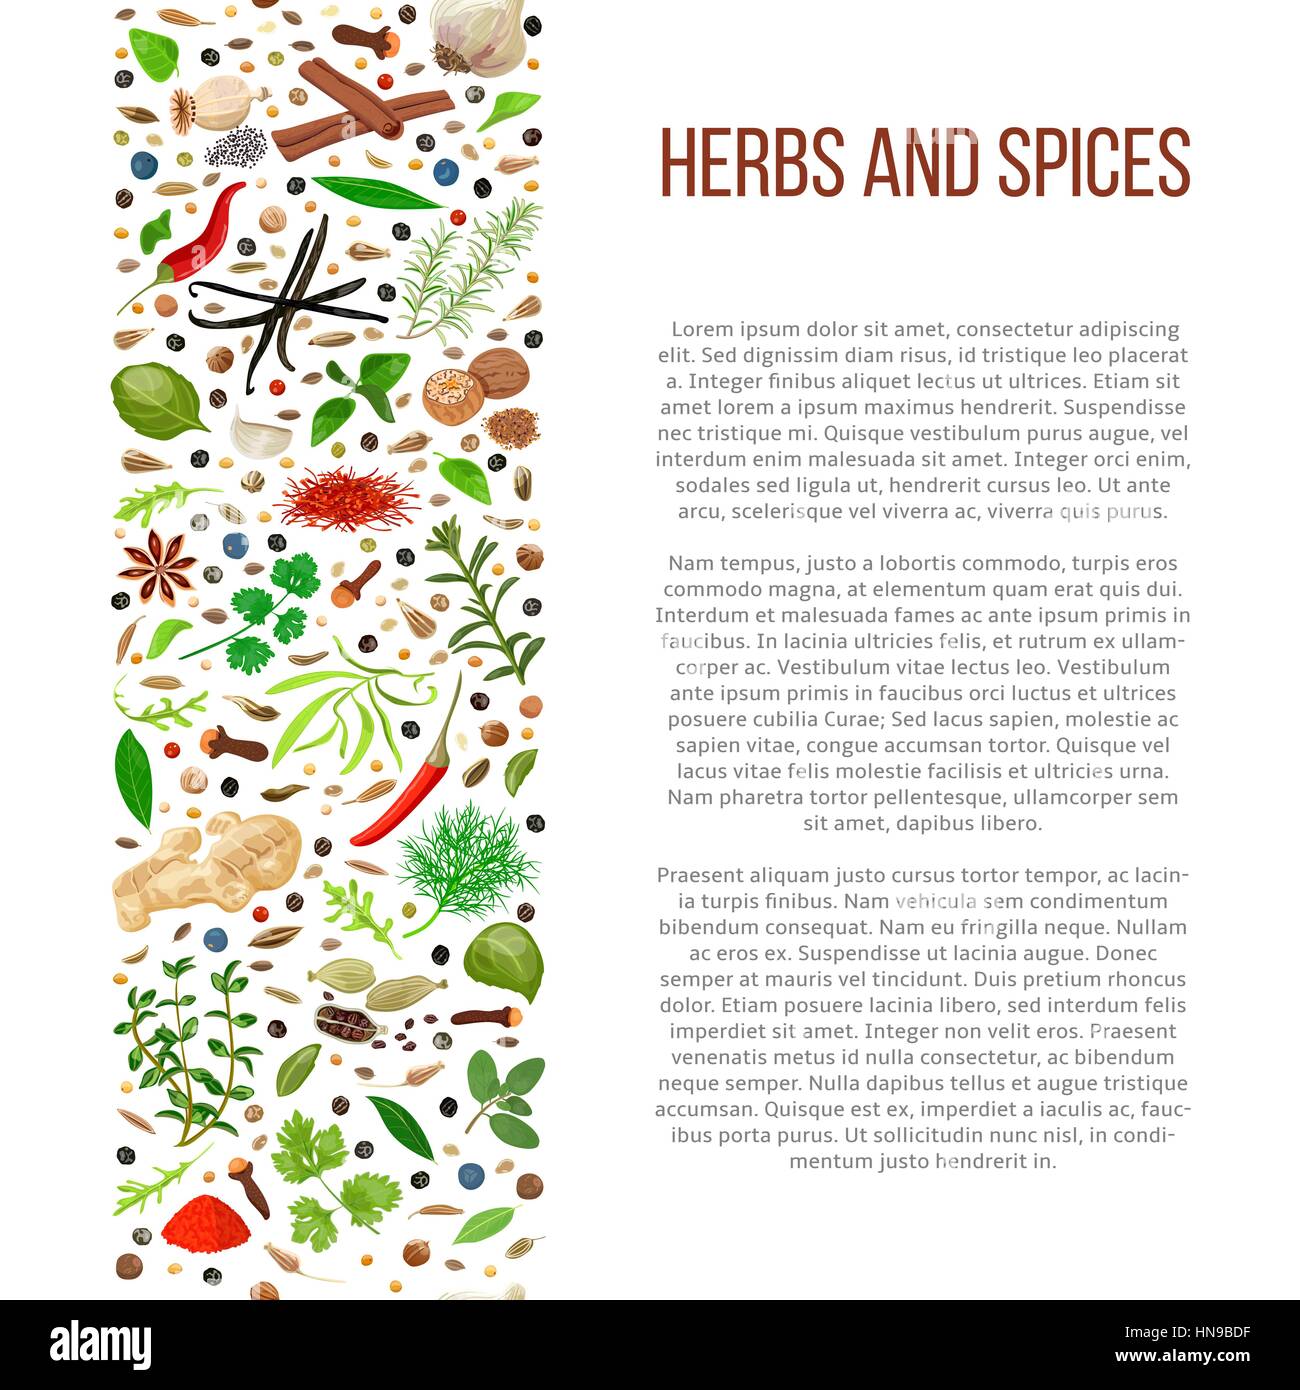 Popular culinary herbs and spices set in column with description. Benefits of cooking spices in informative poster with text. Design for cosmetics, Stock Vector